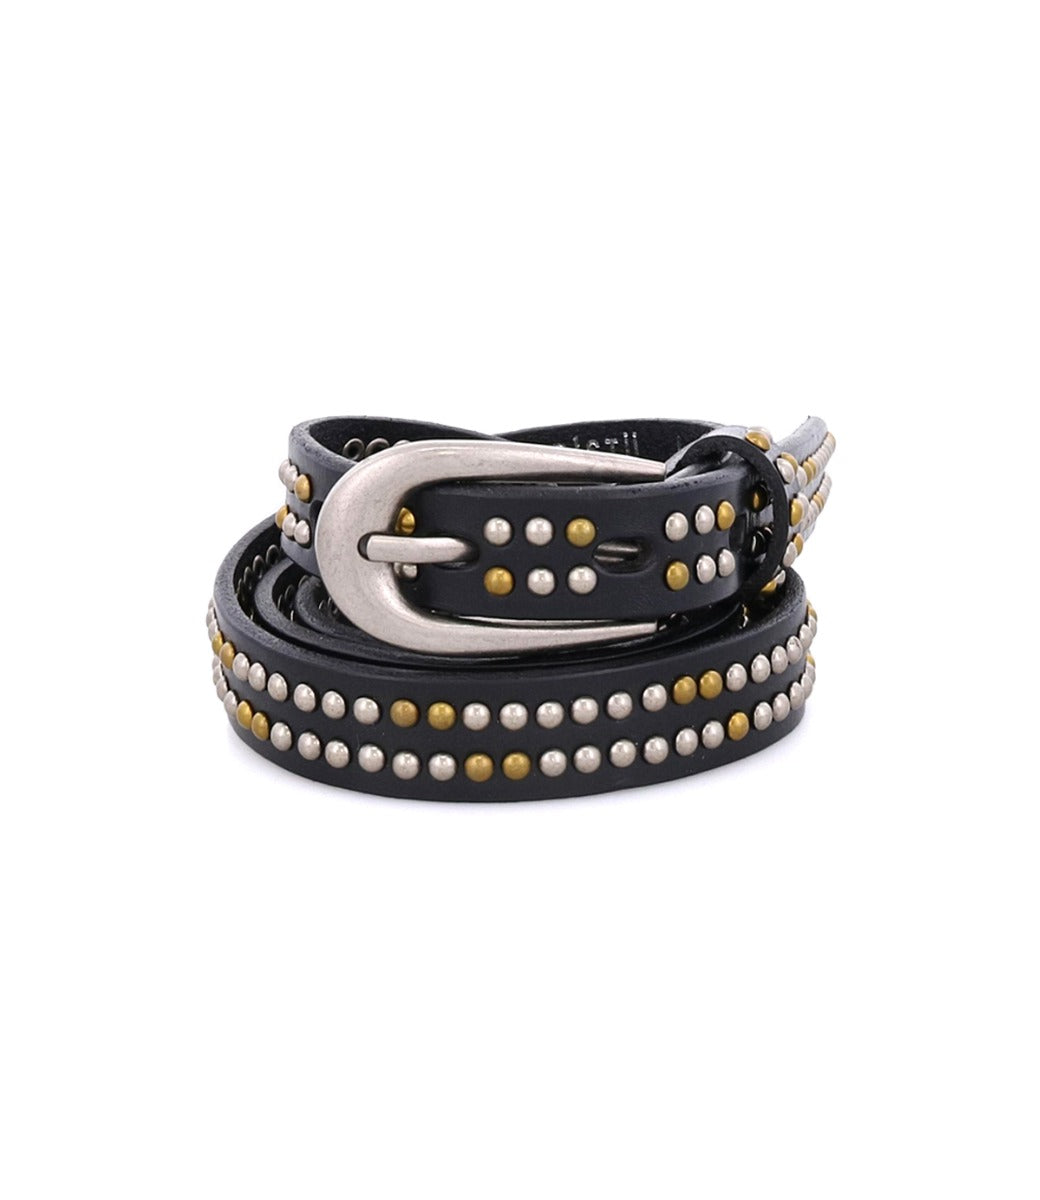 A black Rico belt with gold studding and a silver buckle from the Bed Stu brand.